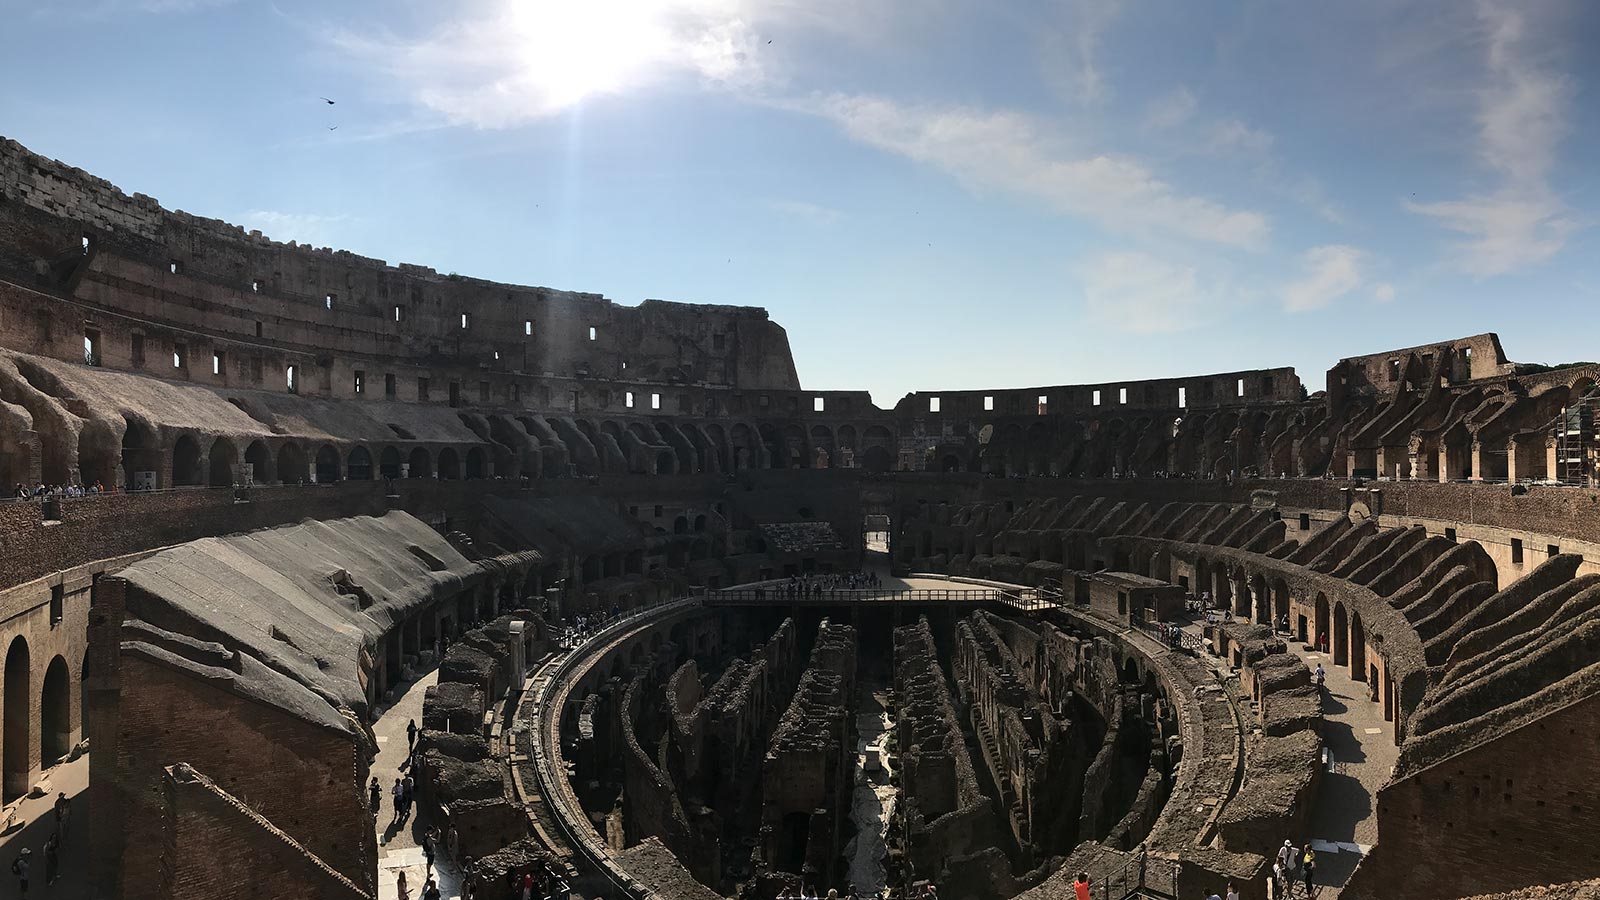 The Colosseum in Rome, Italy. The Colosseum & Rome, the last wonder